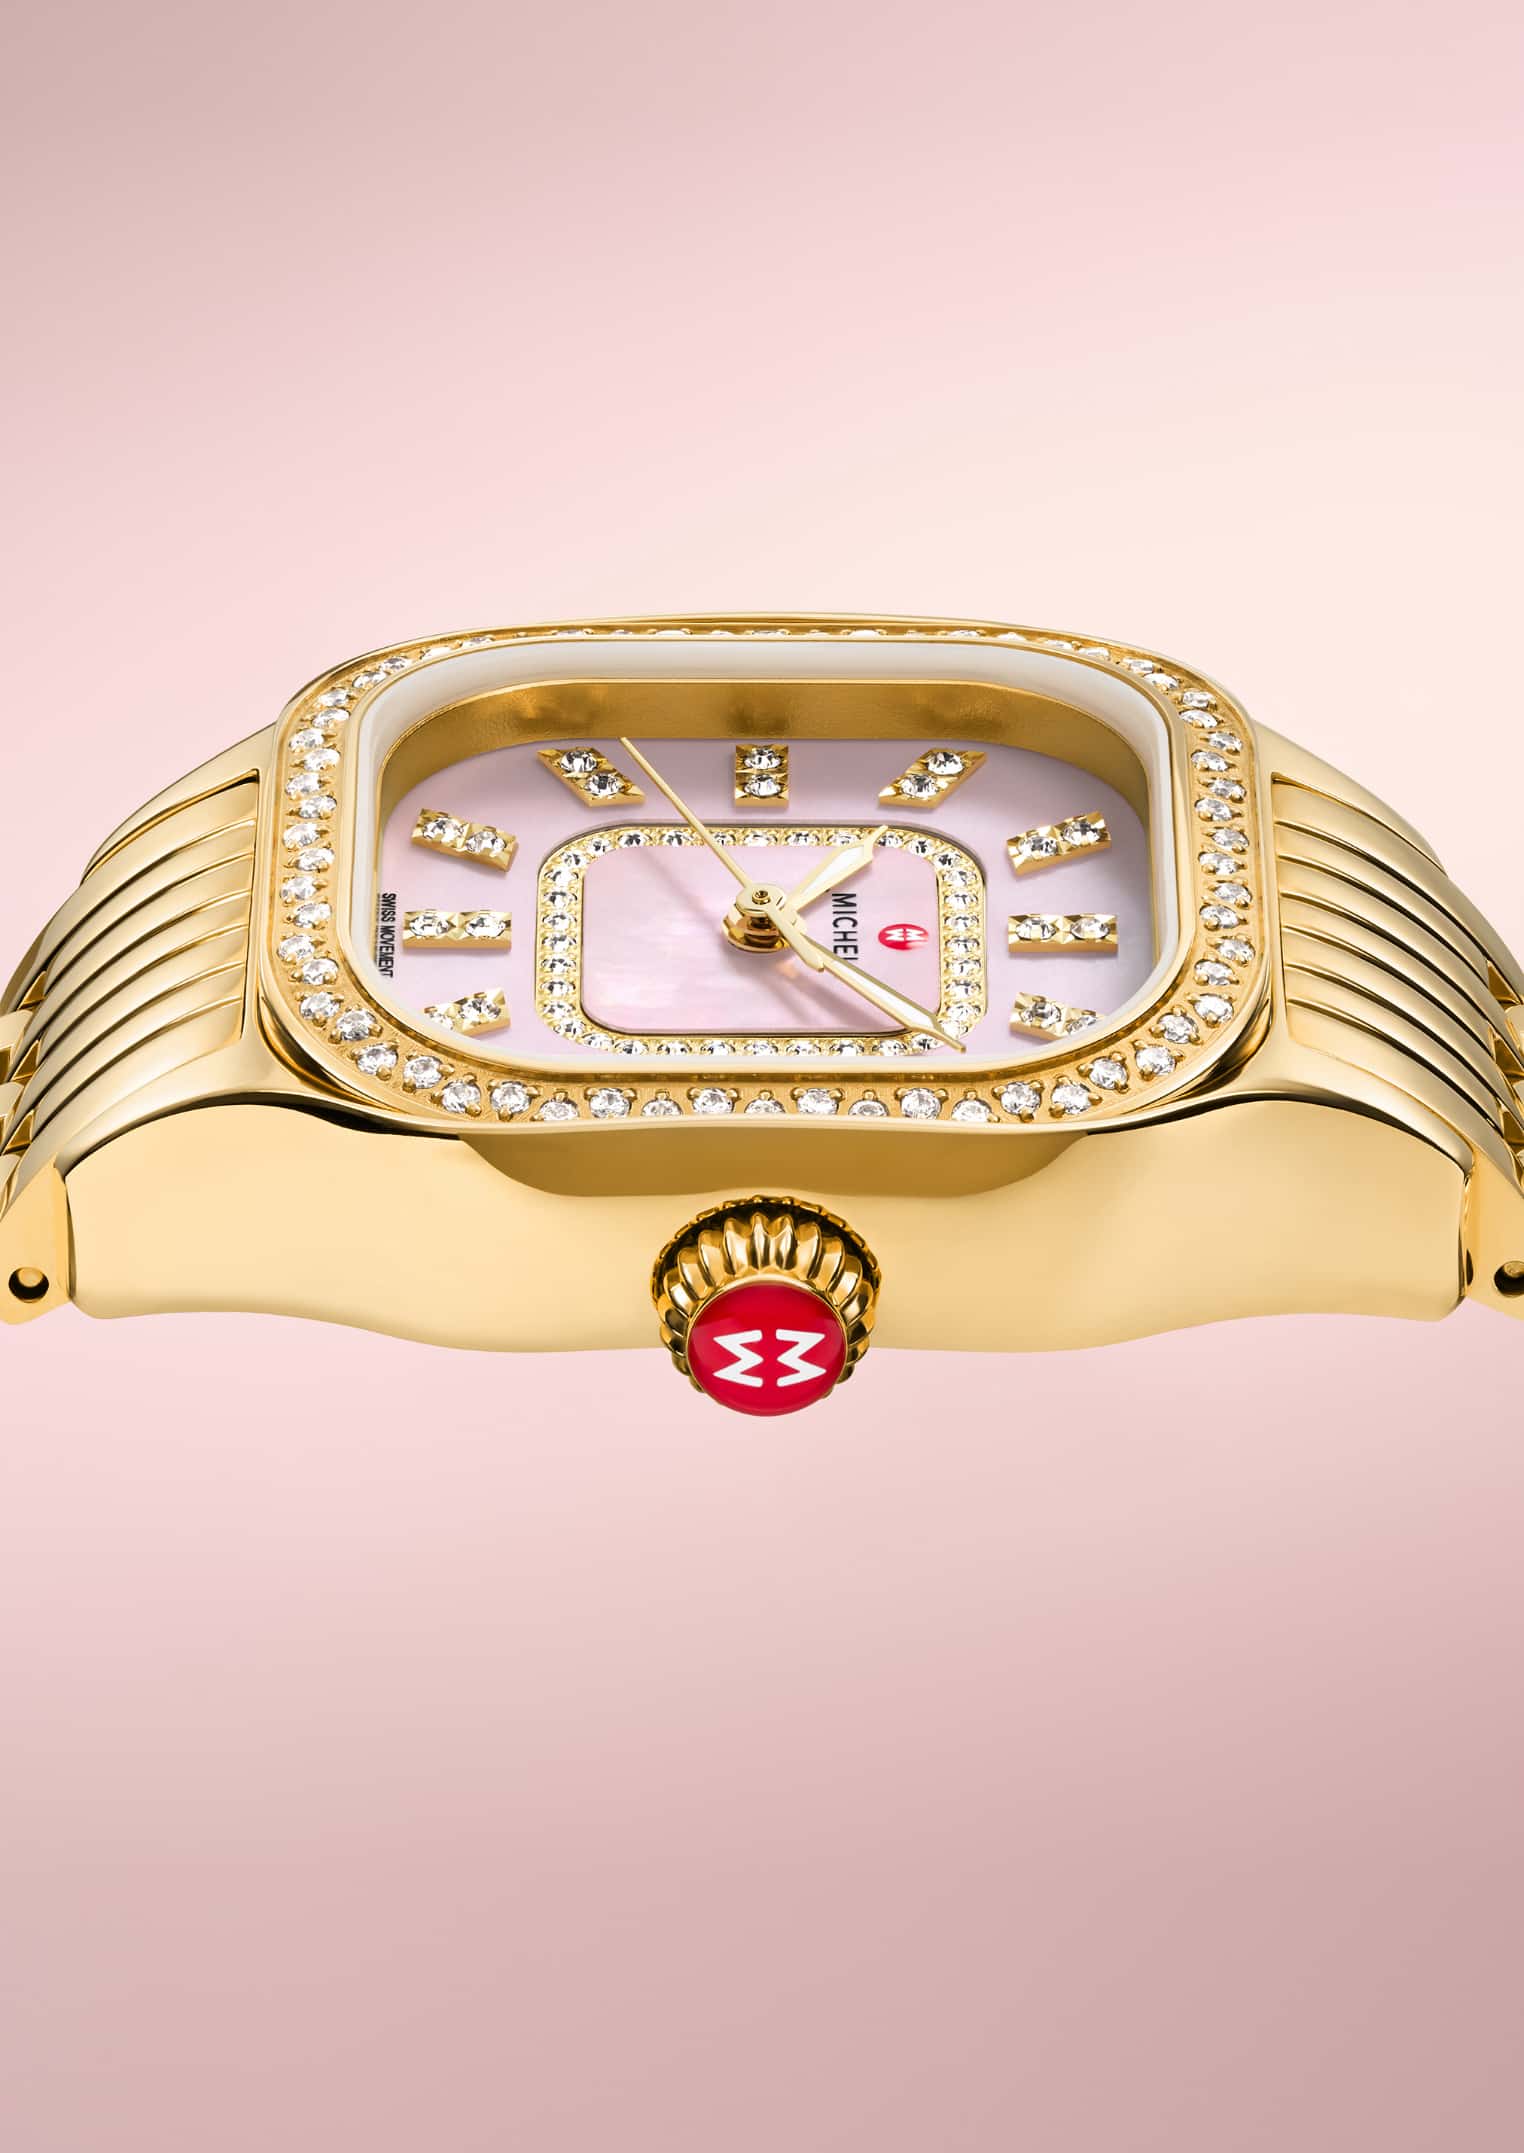 gold and diamond Meggie watch with a pink dial by MICHELE